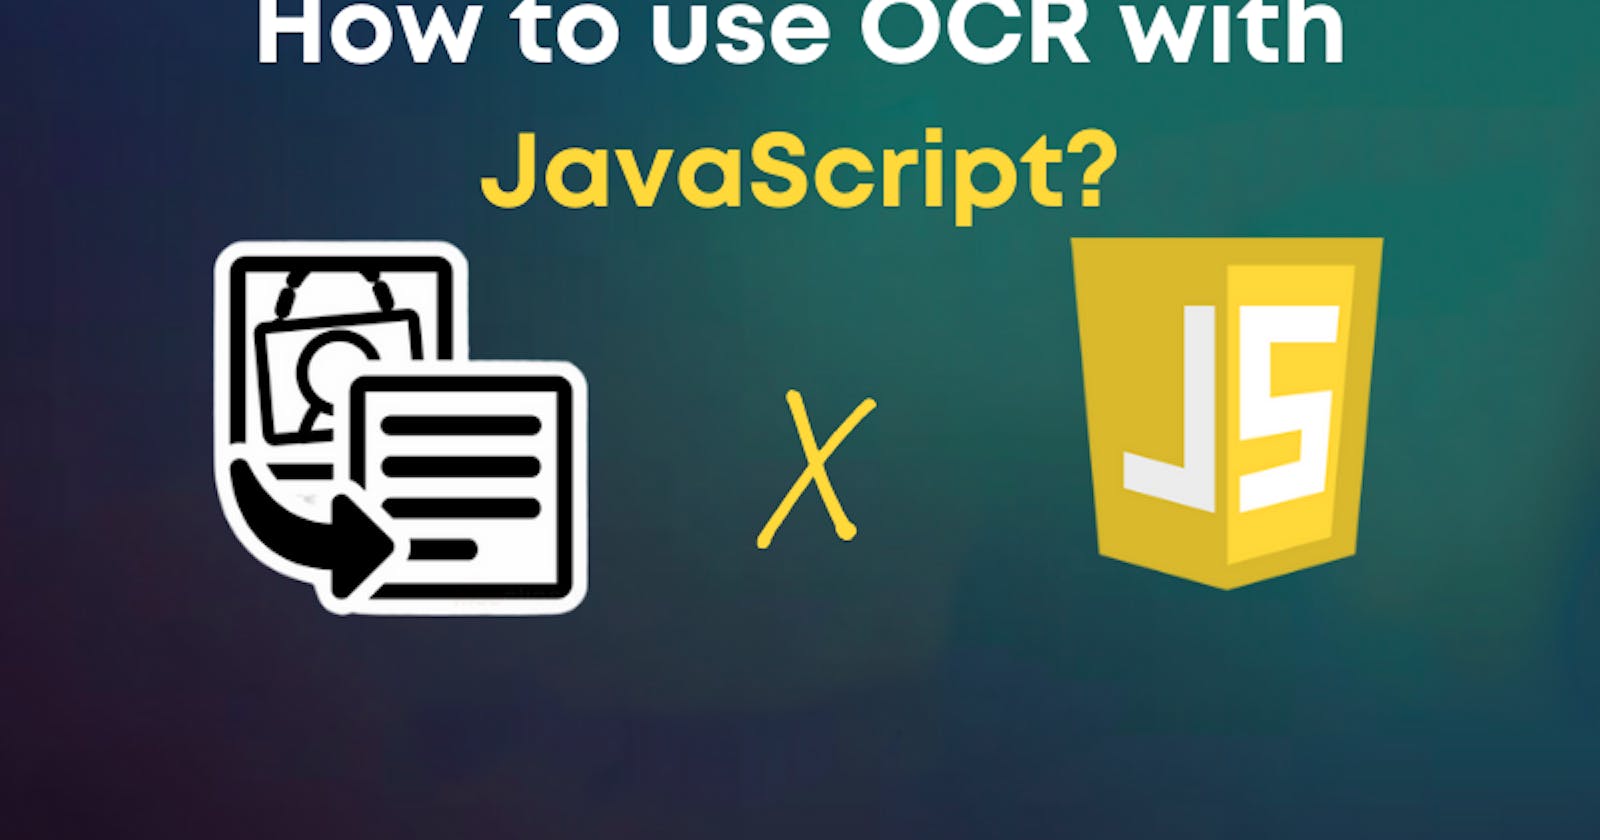 How to use OCR with JavaScript?